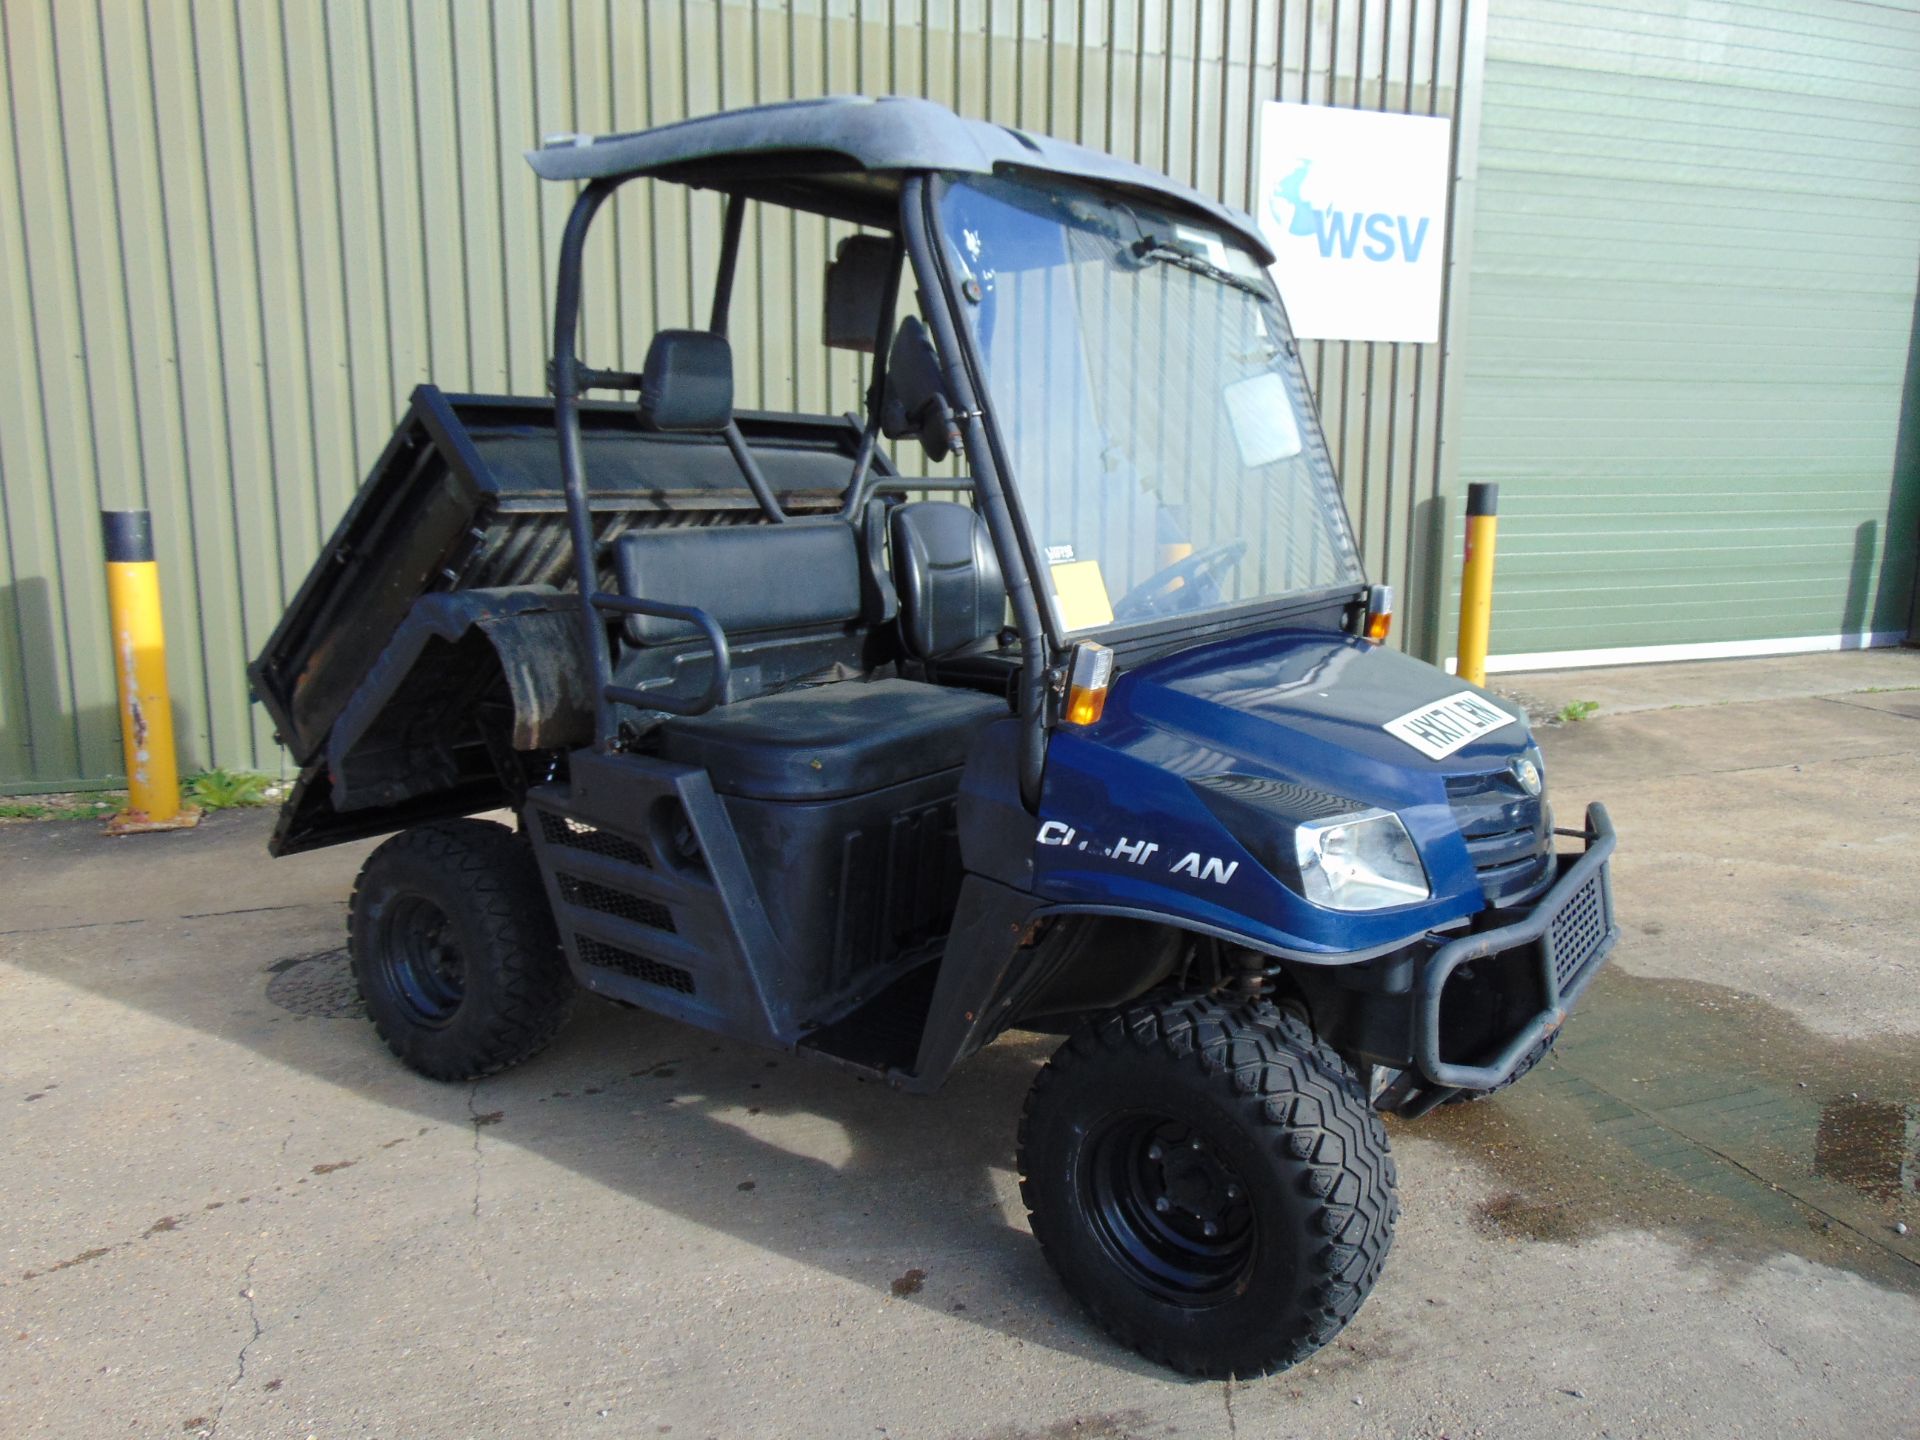 2017 Cushman XD1600 4x4 Diesel Utility Vehicle Showing 834 hrs - Image 10 of 20